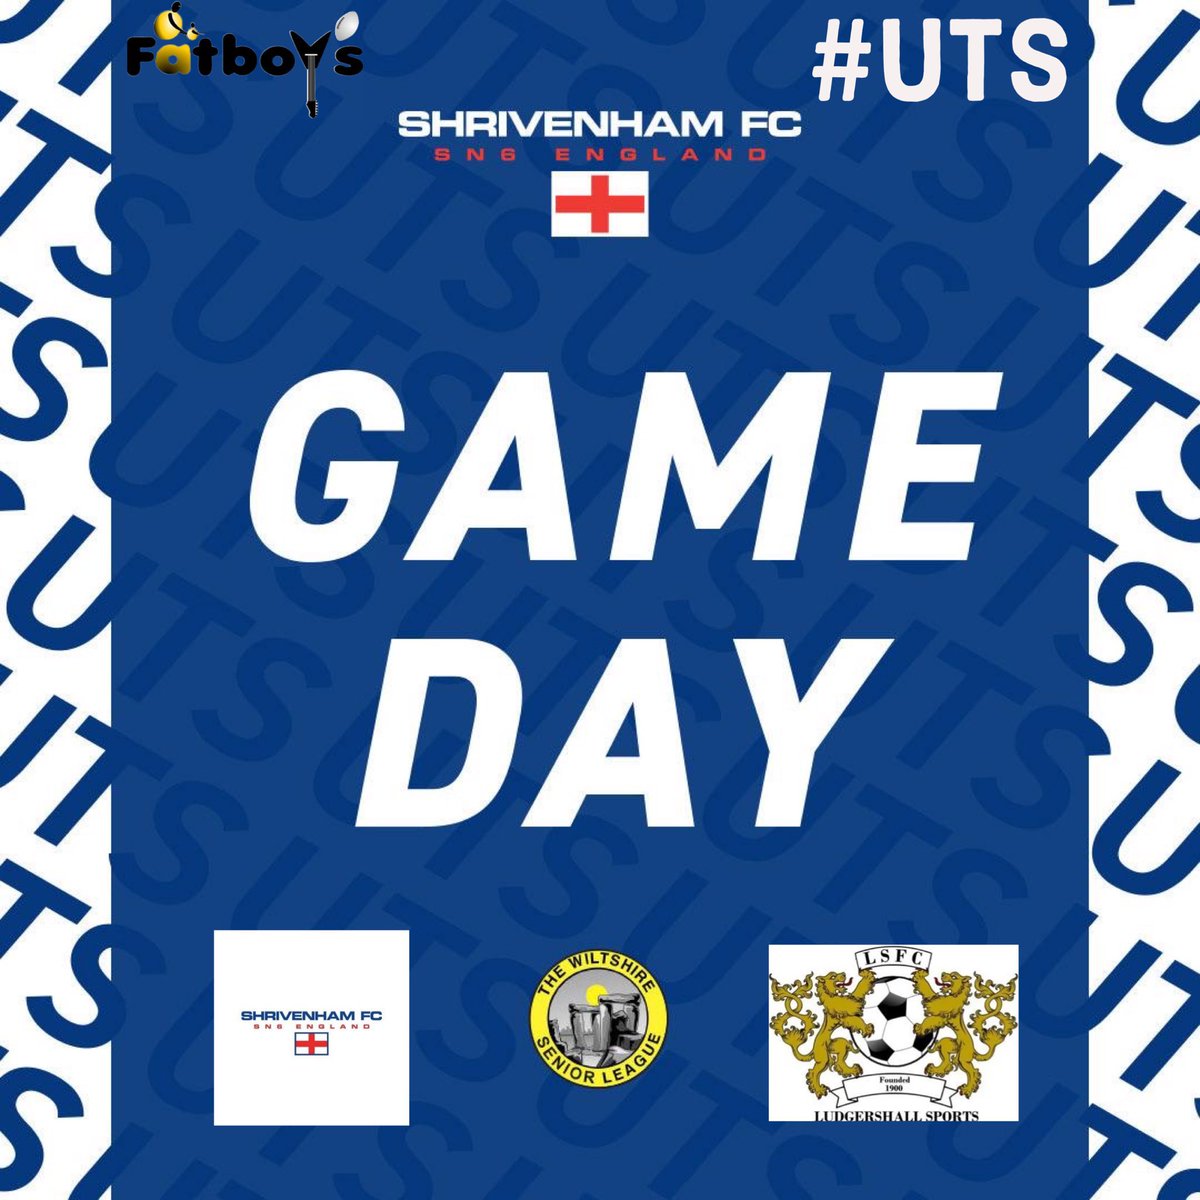 🔵⚪️GAME DAY🔵⚪️ The boys are back in action today as we welcome @ludgershallsfc to the Ian Richardson Ground 🆚 @ludgershallsfc 🏆Wiltshire Senior League ⌚️ 15:00 📍RECREATION GROUND, SHRIVENHAM,Oxfordshire SN6 8BJ #UTS 🔵⚪️ @WiltsLeague @OxOnFootball @YSswindon